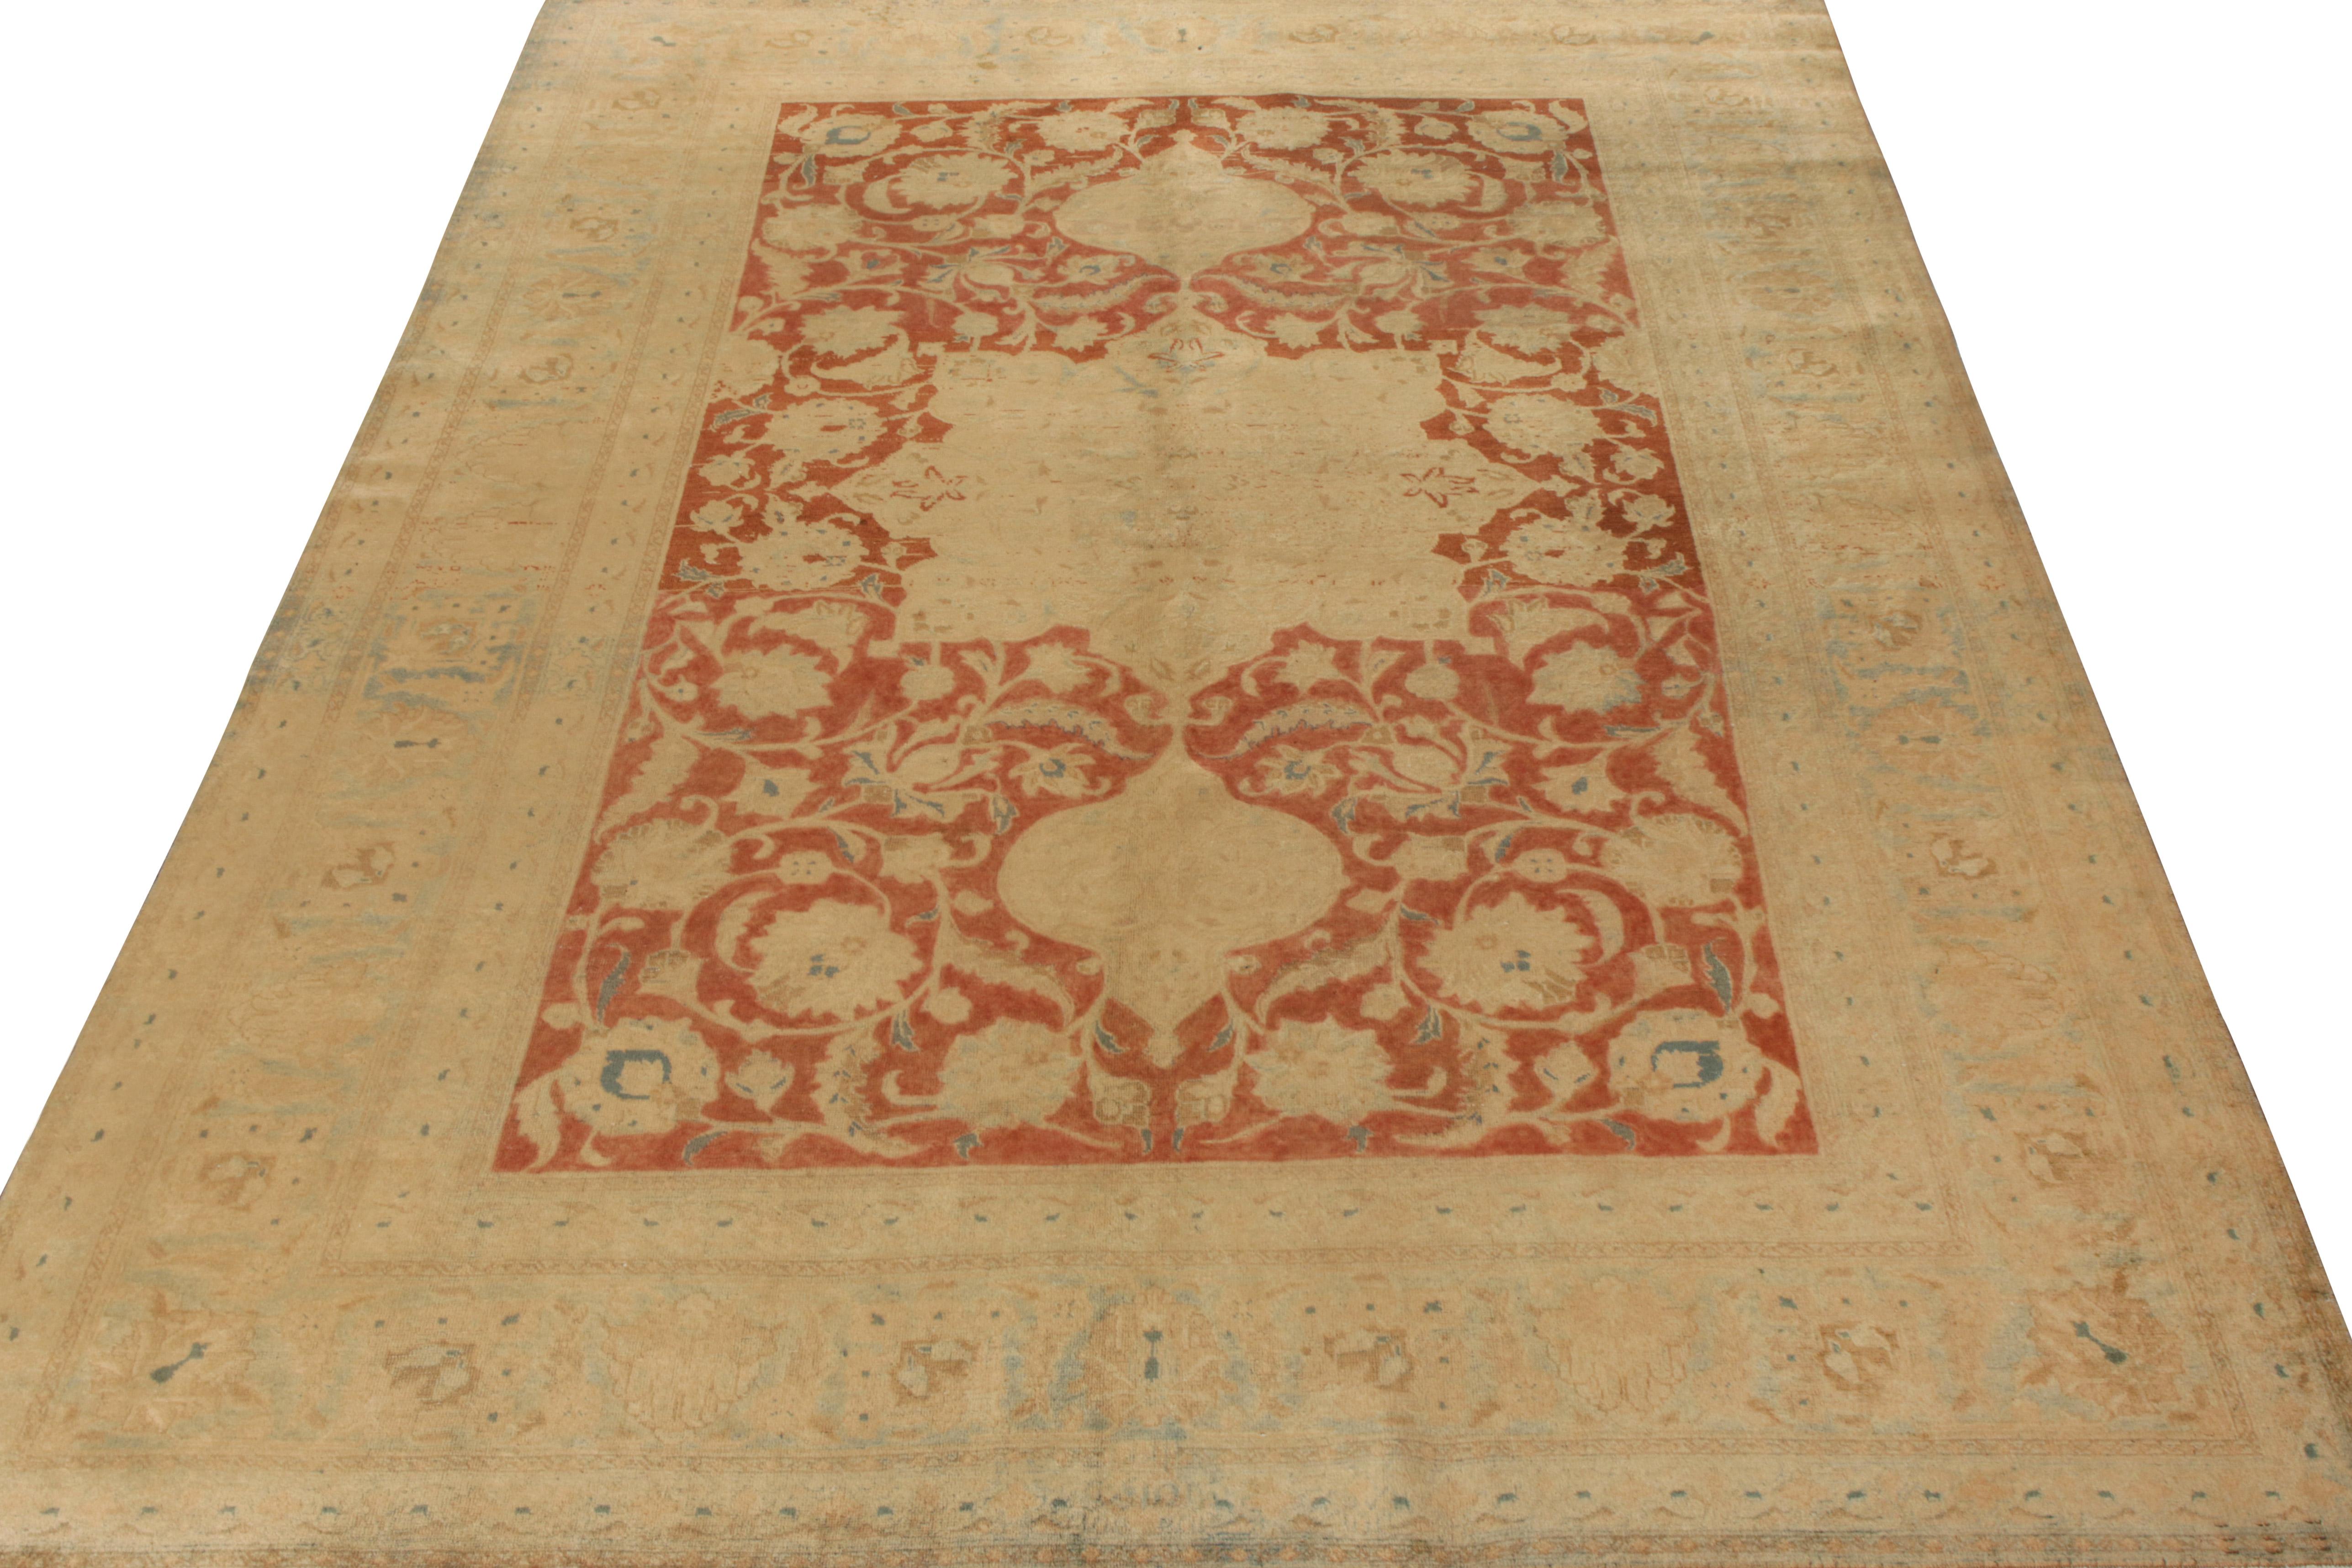 A fabulous 6x9 Tabriz antique rug originating from Persia circa 1920-1930 making a distinguished entry to Rug & Kilim’s Antique & Vintage collection. Hand knotted in wool with a fabulous sheen, this Persian glory bears a gorgeous central pattern of